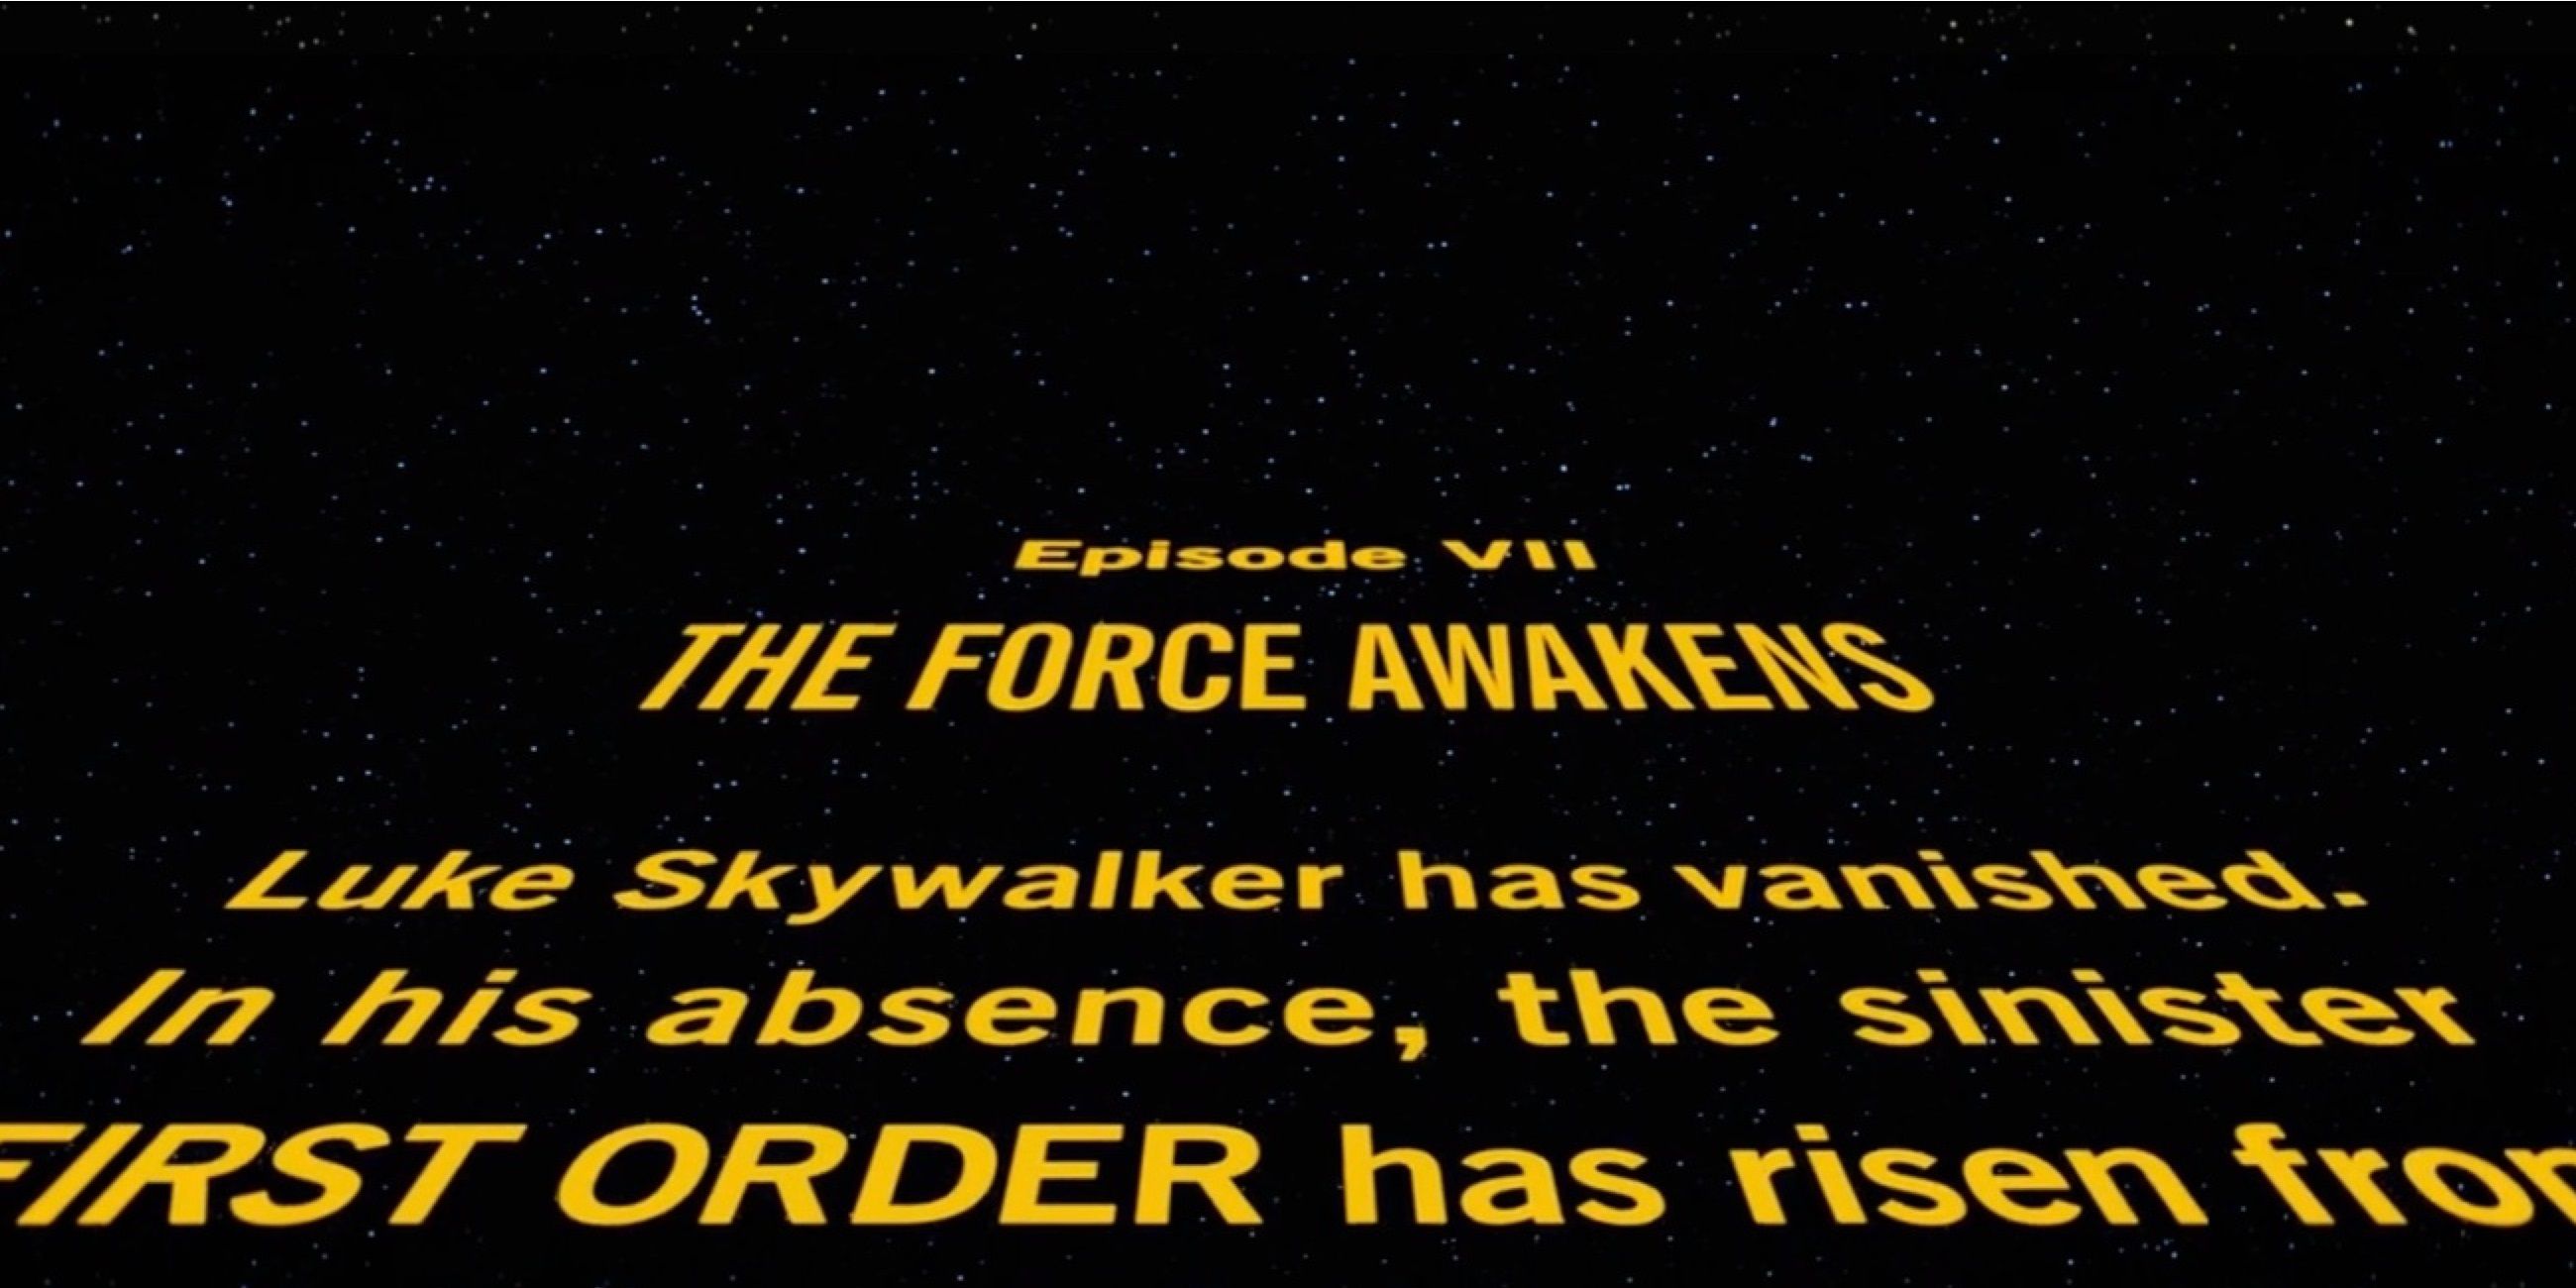 The opening text crawl of Star Wars Episode VII The Force Awakens